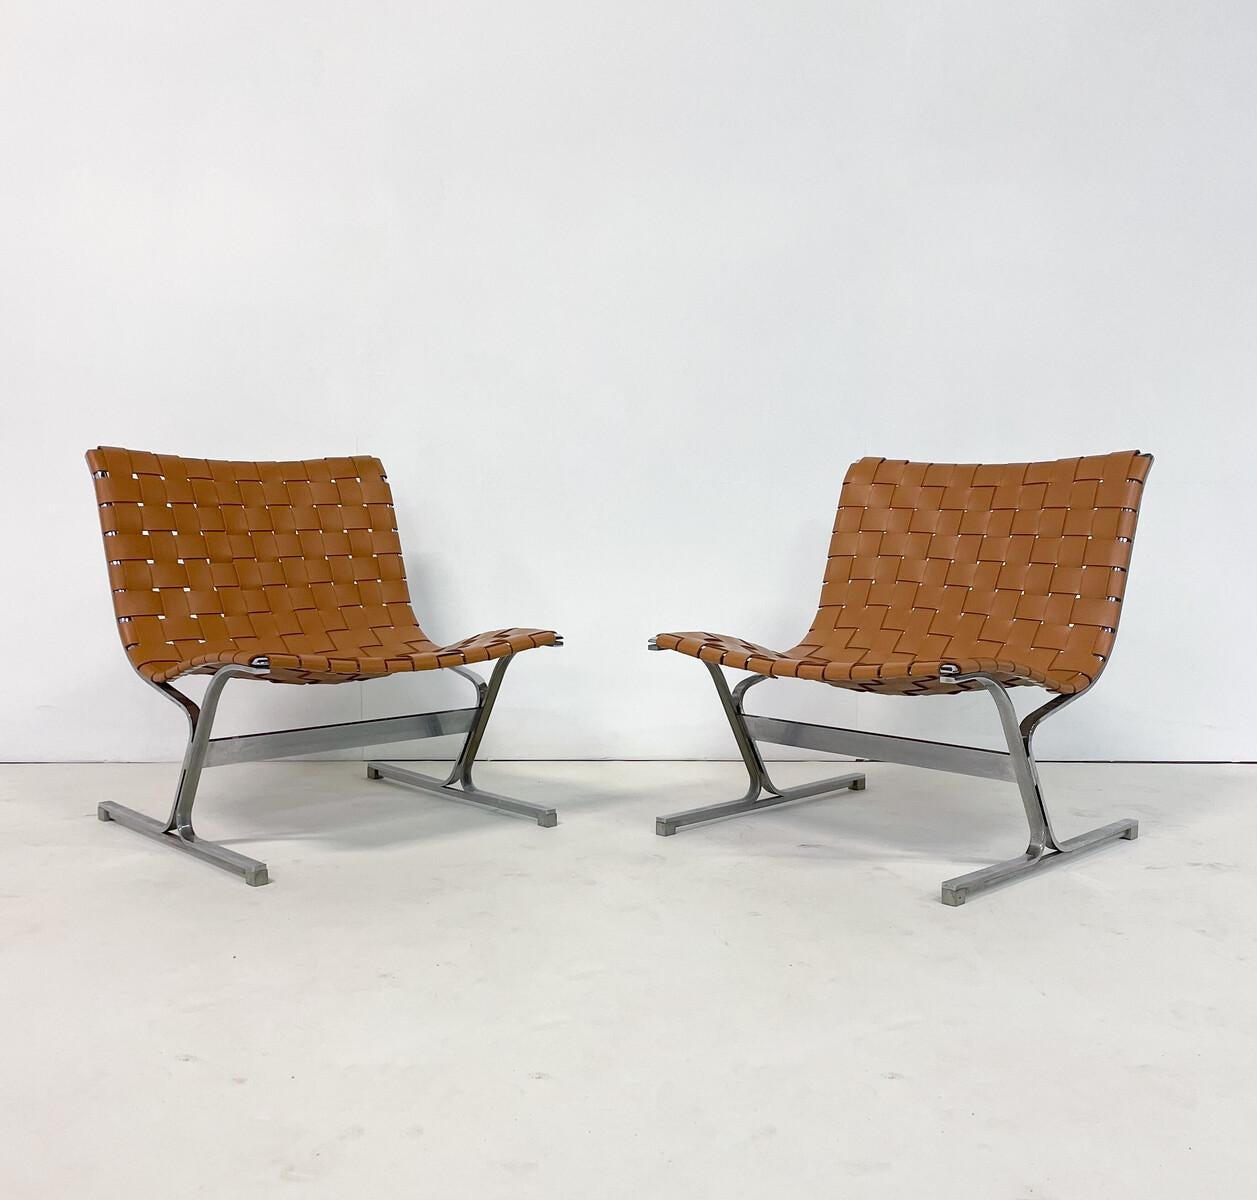 Late 20th Century Midcentury Pair of Lounge Chairs by Ross Littell for ICF, Cognac Leather, Italy